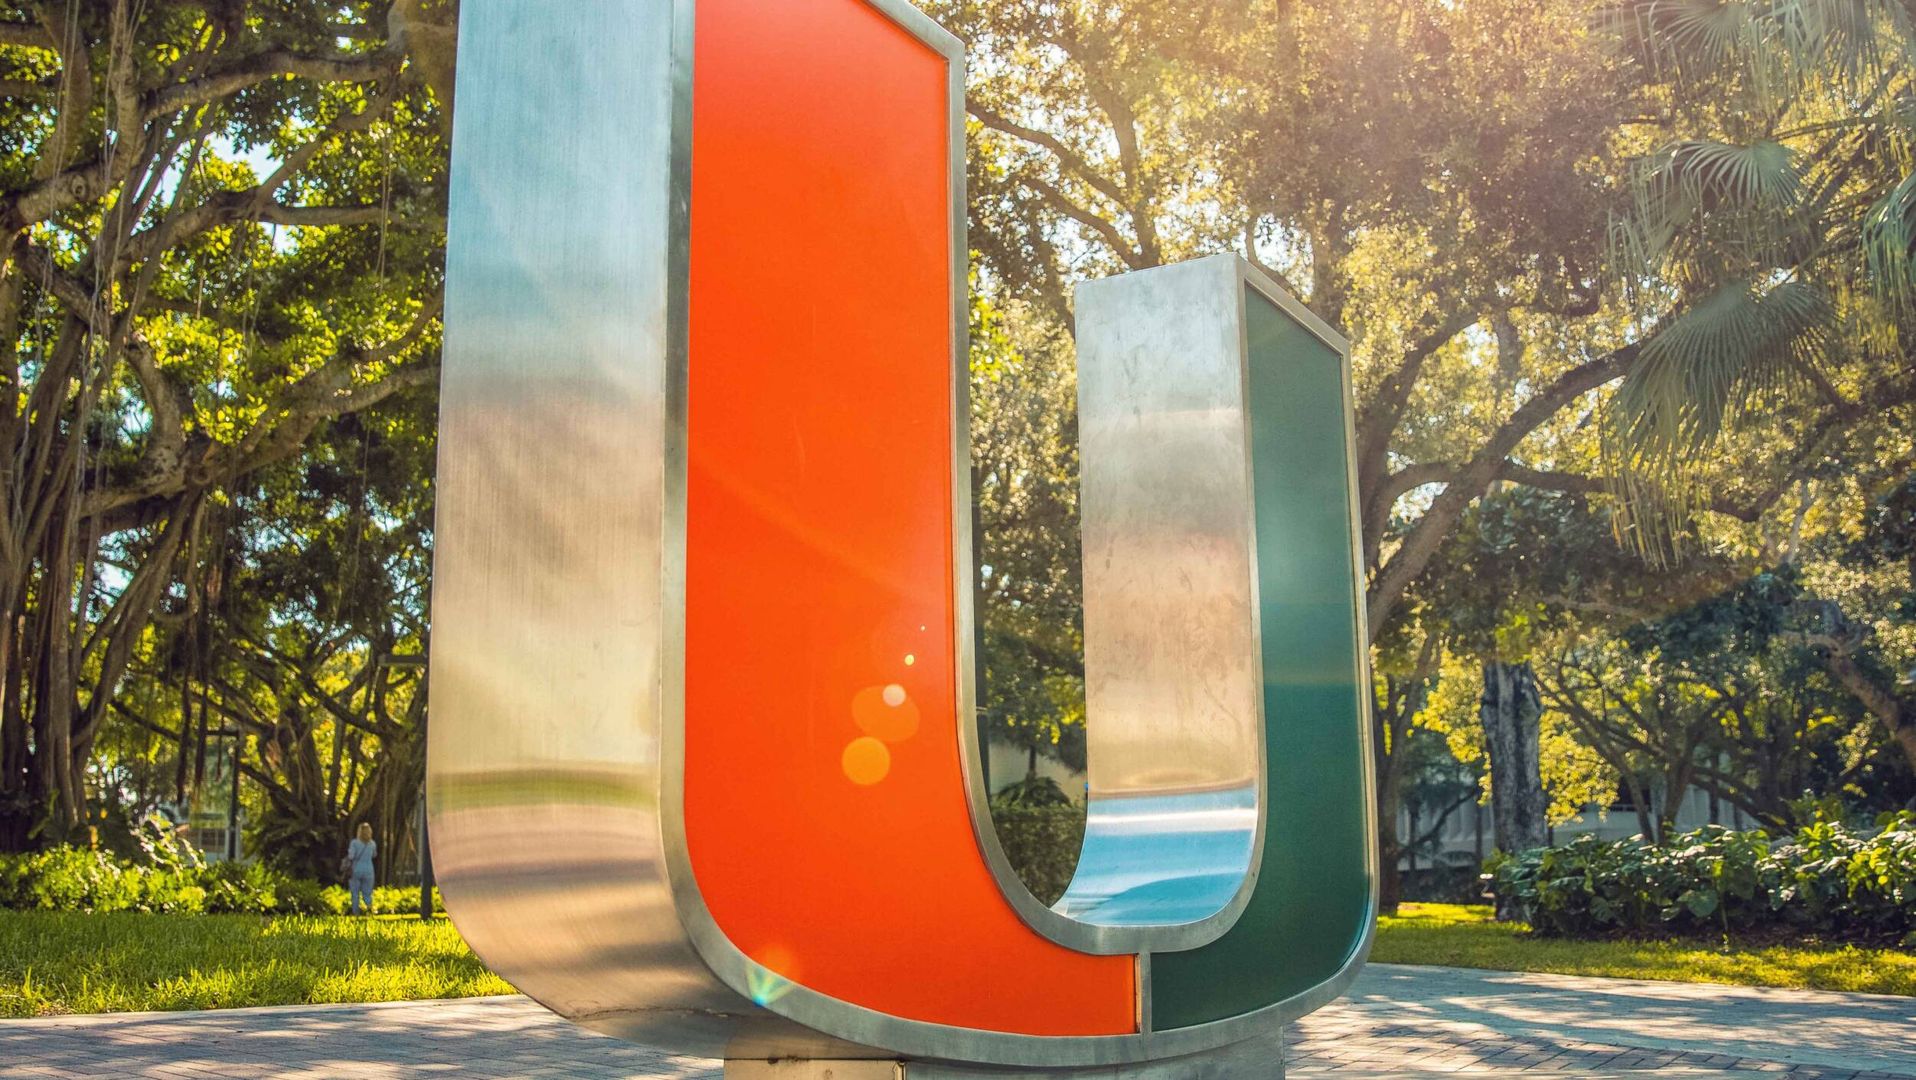 Miami Places 213 on ACC Honor Roll